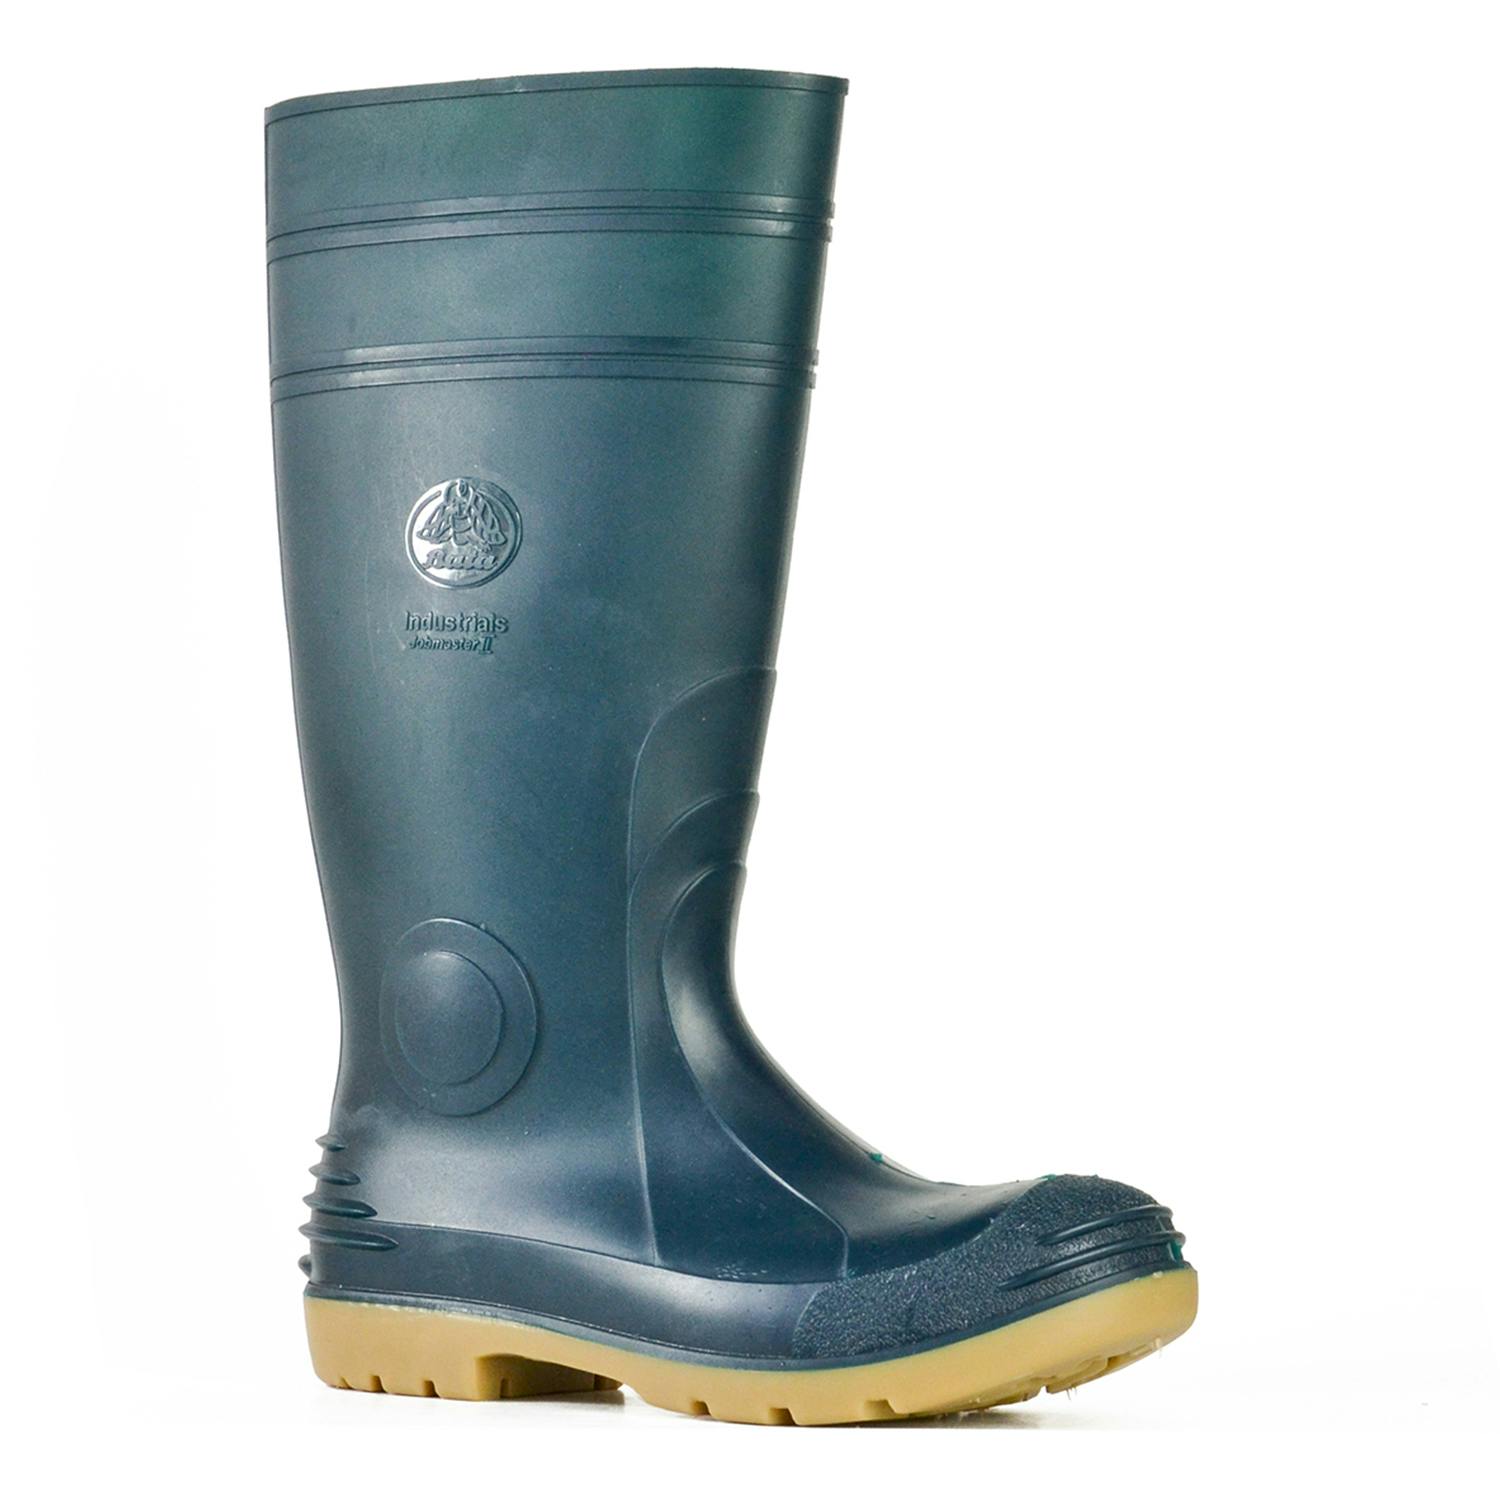 Bata Industrials Jobmaster 2-400-NS - Green / Gristle PVC 400Mm Non Safety Boot (PVC Jobmaster 2)